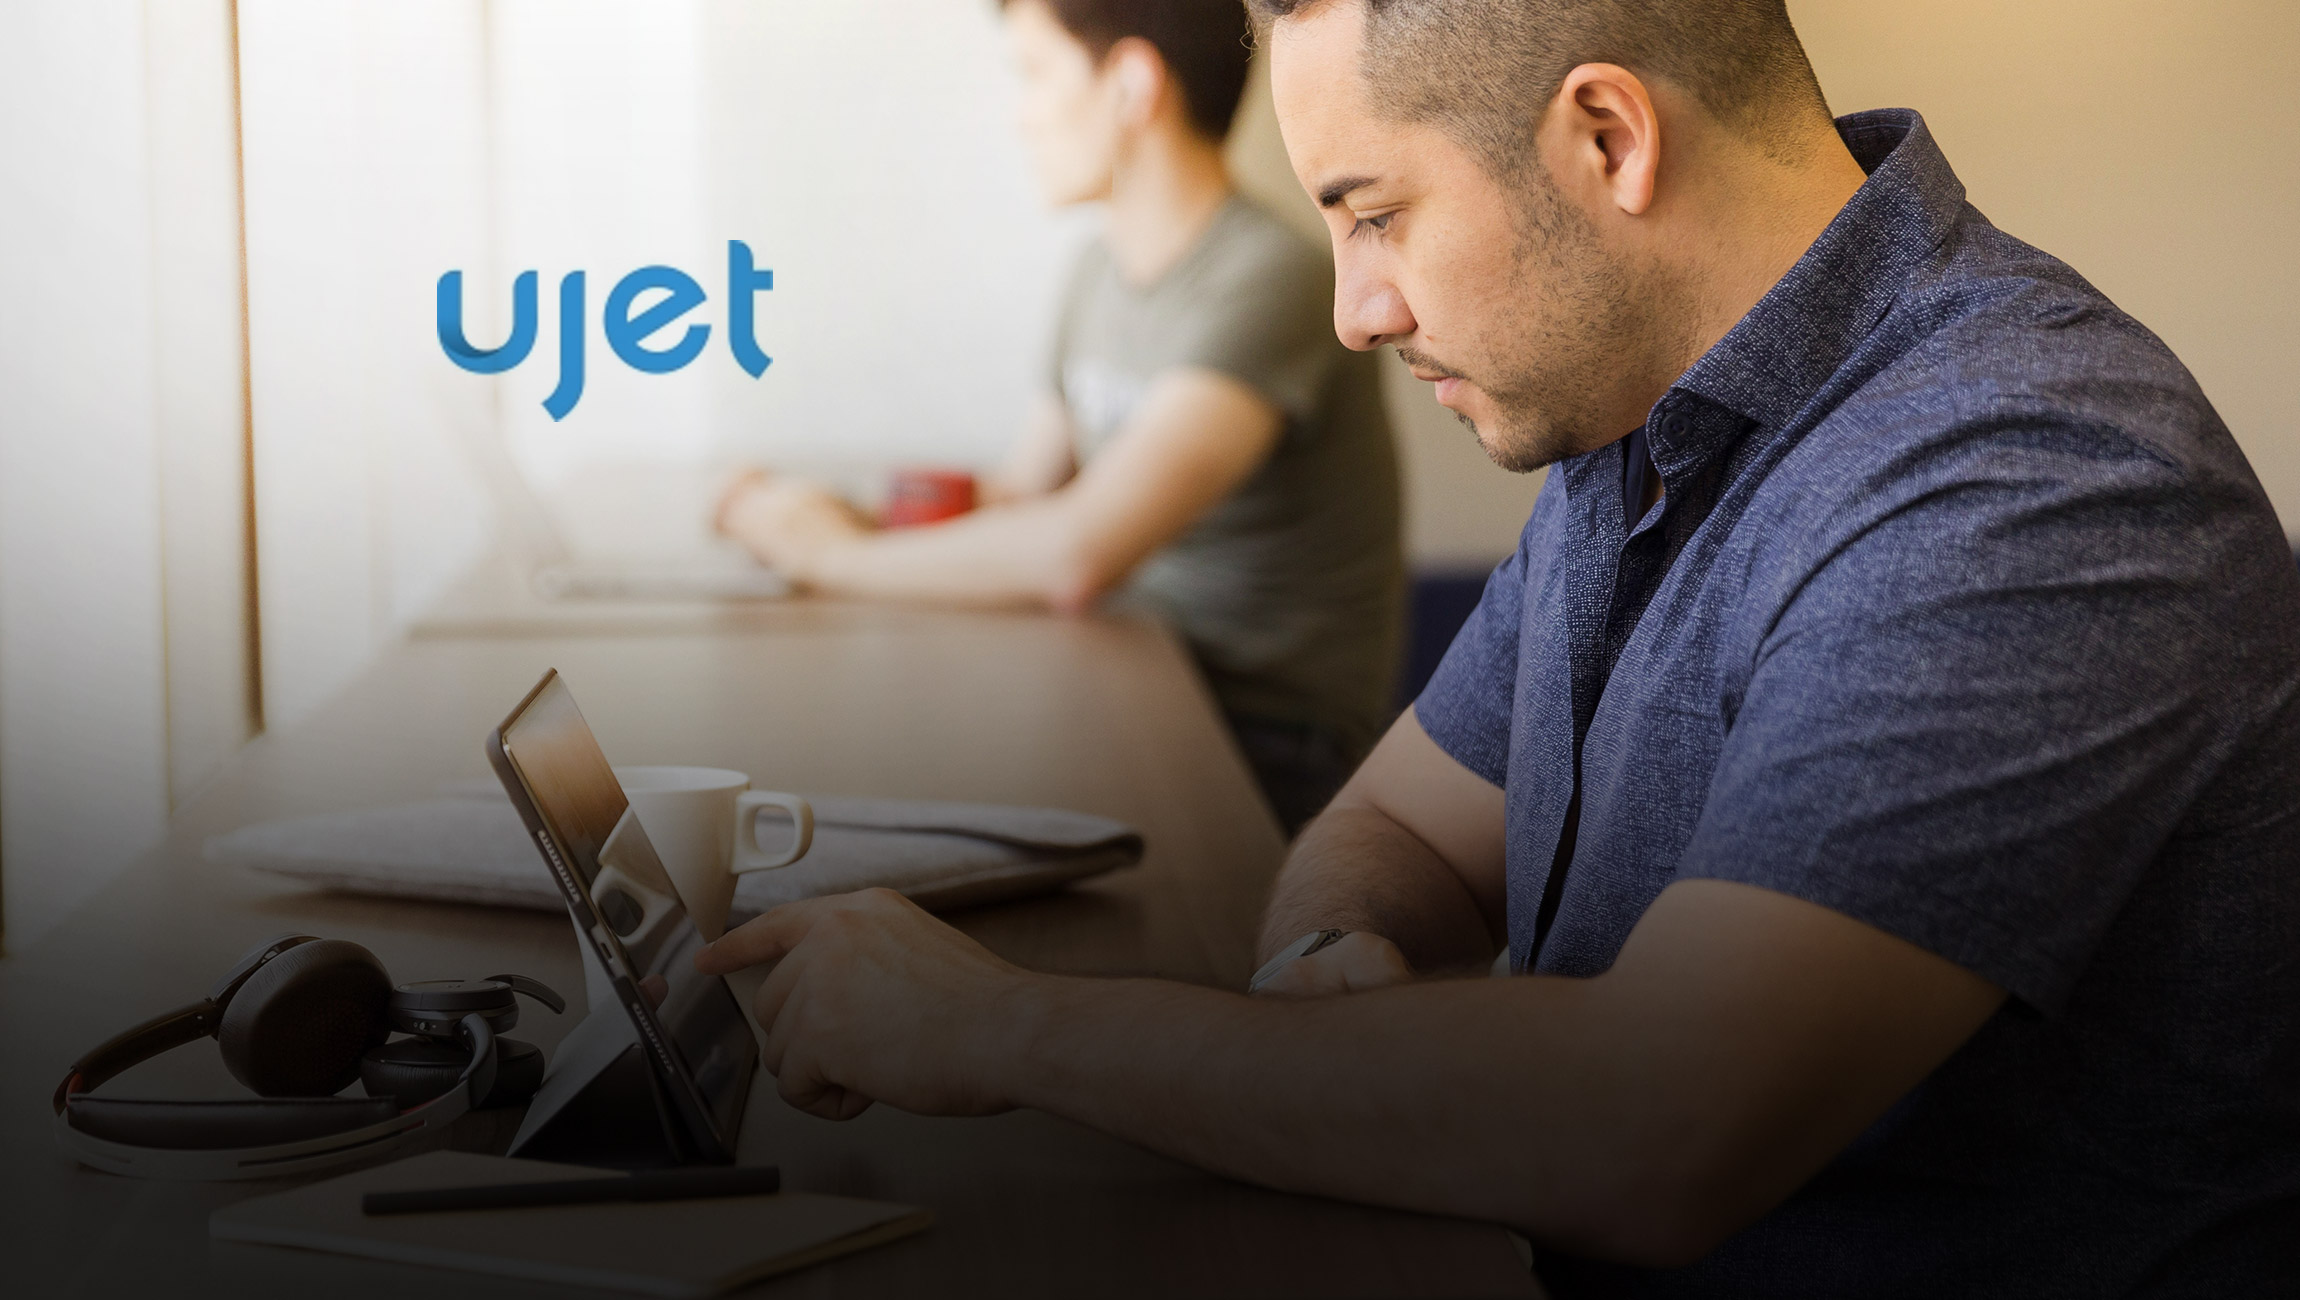 UJET Powers the World’s Largest Cloud Contact Center, with Over 22,000 Agents, for One of North America’s Largest E-Commerce Companies